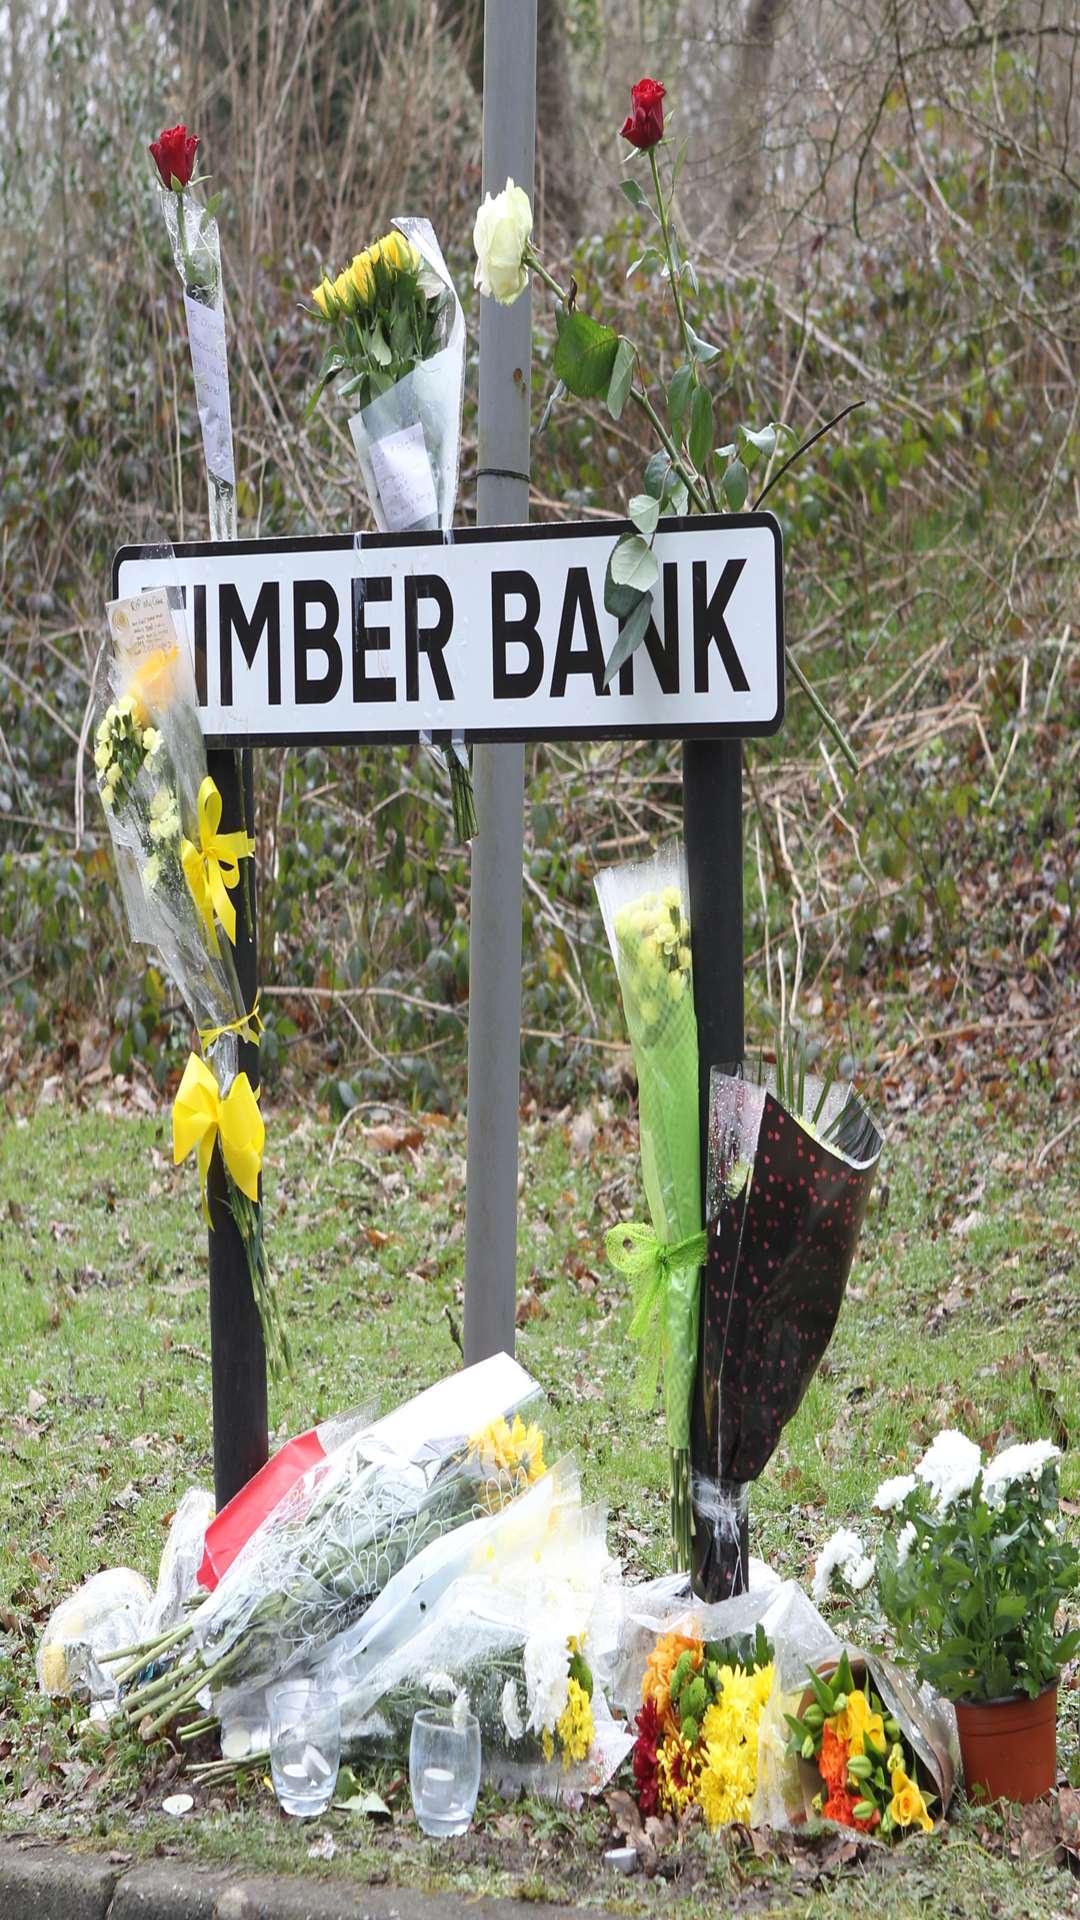 Floral tributes adorn the Timber Bank sign in Vigo near to where the two 18-year-olds died. Picture: John Westhrop